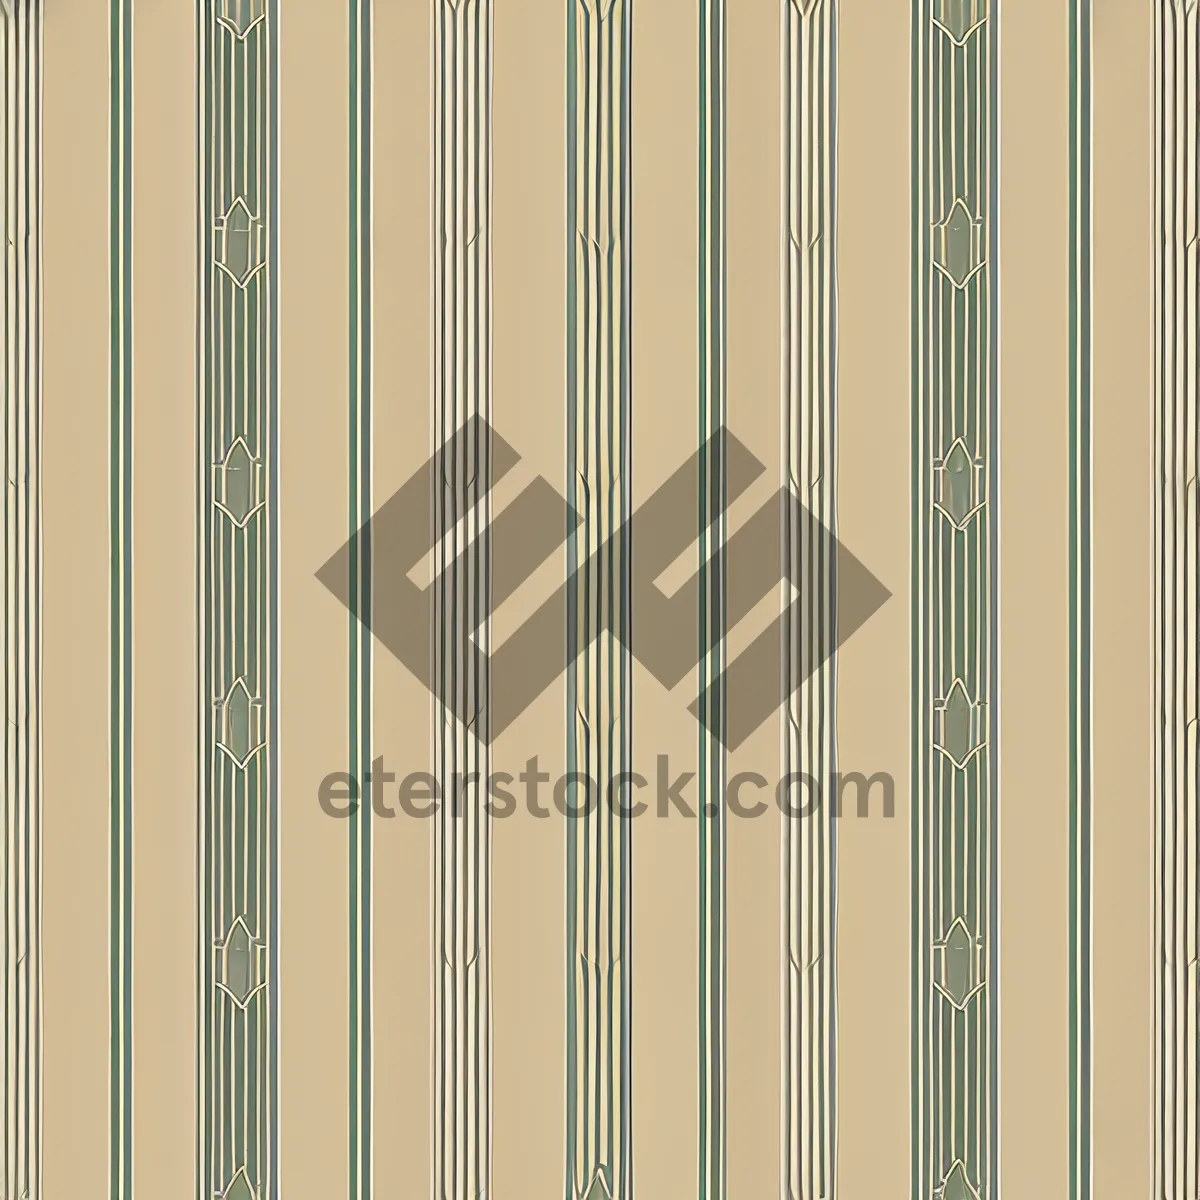 Picture of Vintage Striped Locker Panel Texture